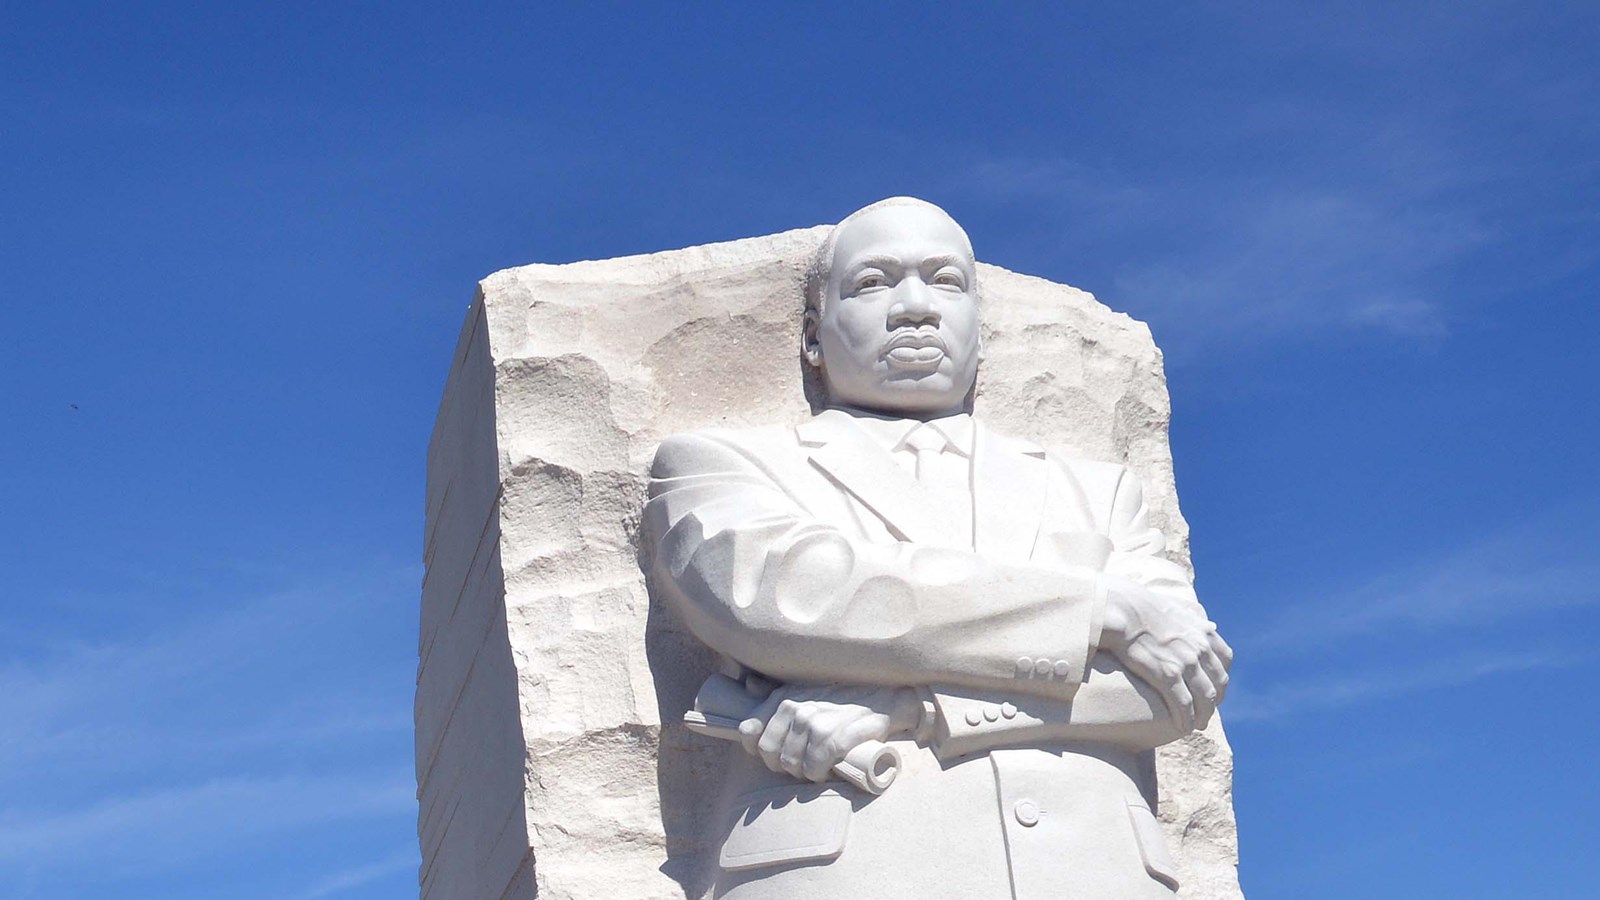 A 30-foot-tall stone sculpture of Martin Luther King, Jr.